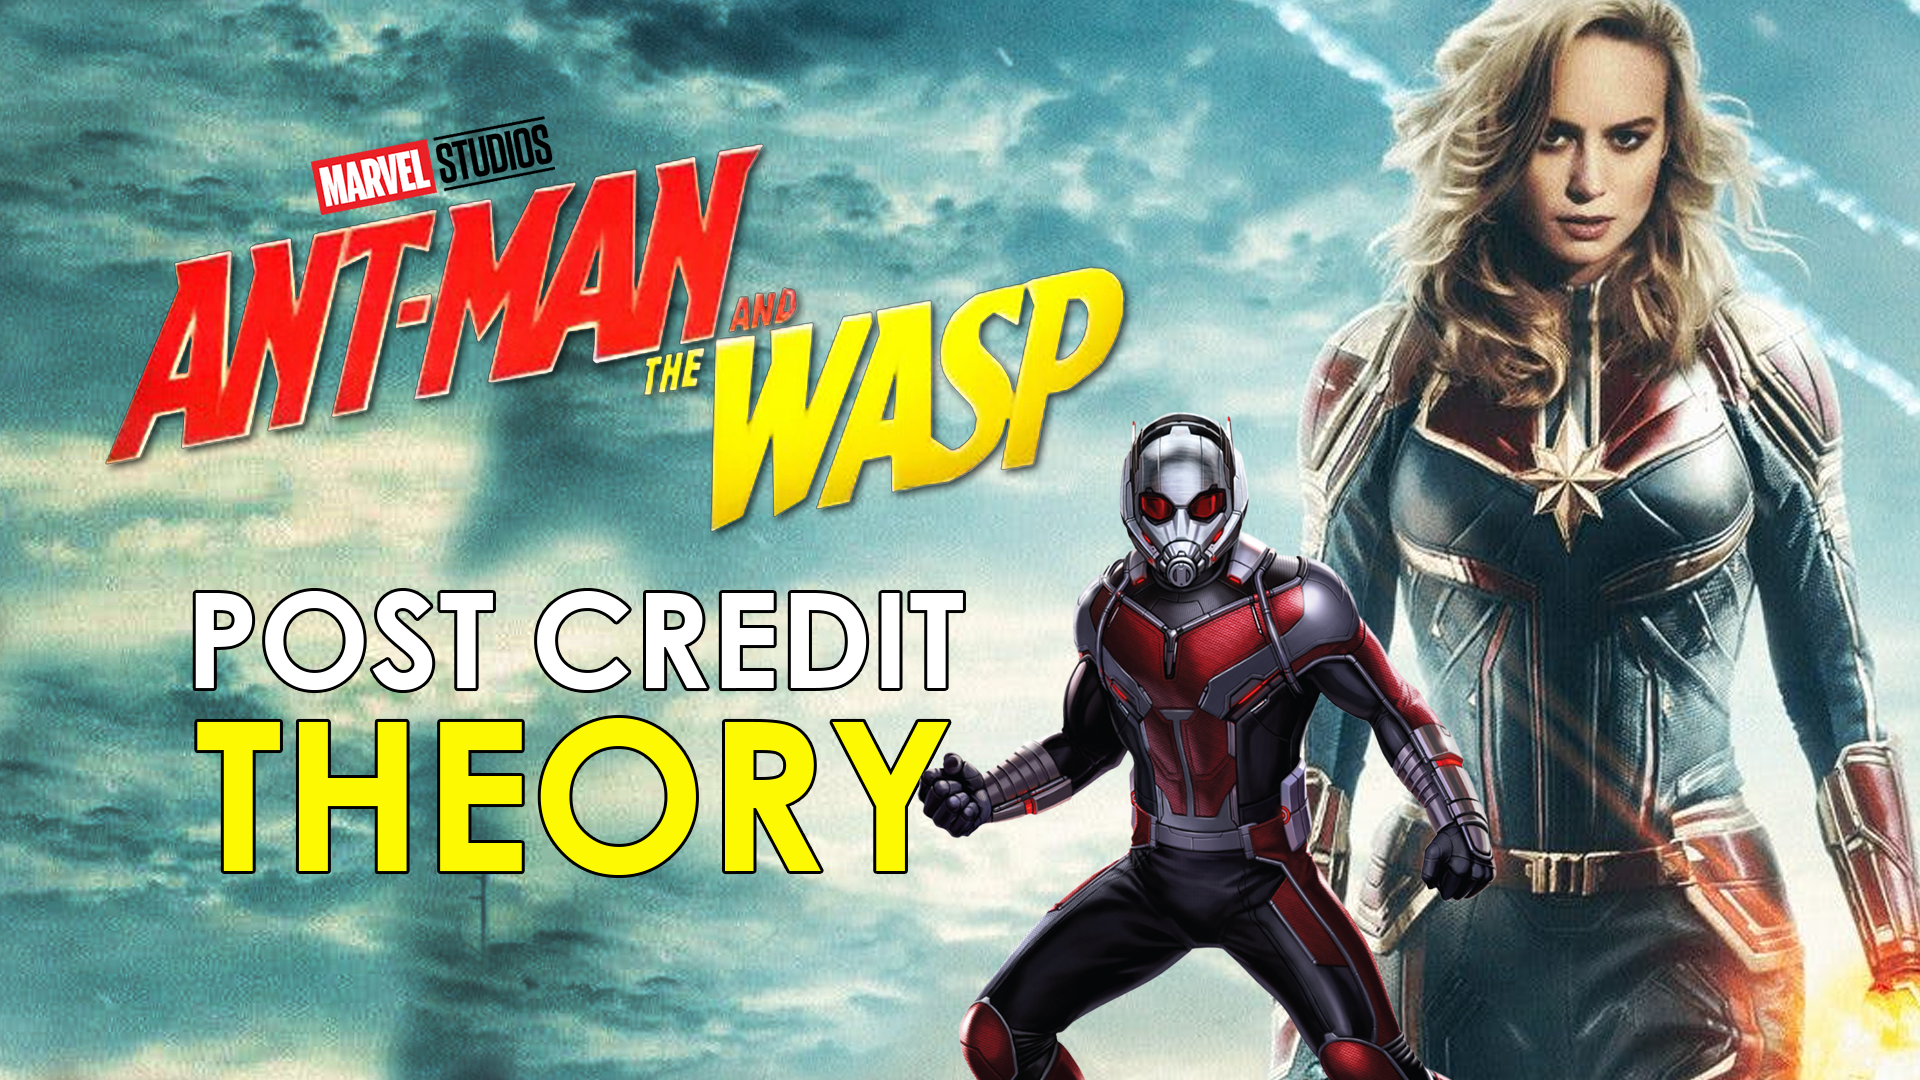 ant man and the wasp post credits scene what happens breakdown and movie ending explained infinity war spoiler talk with thanos and avengers captain marvel theory